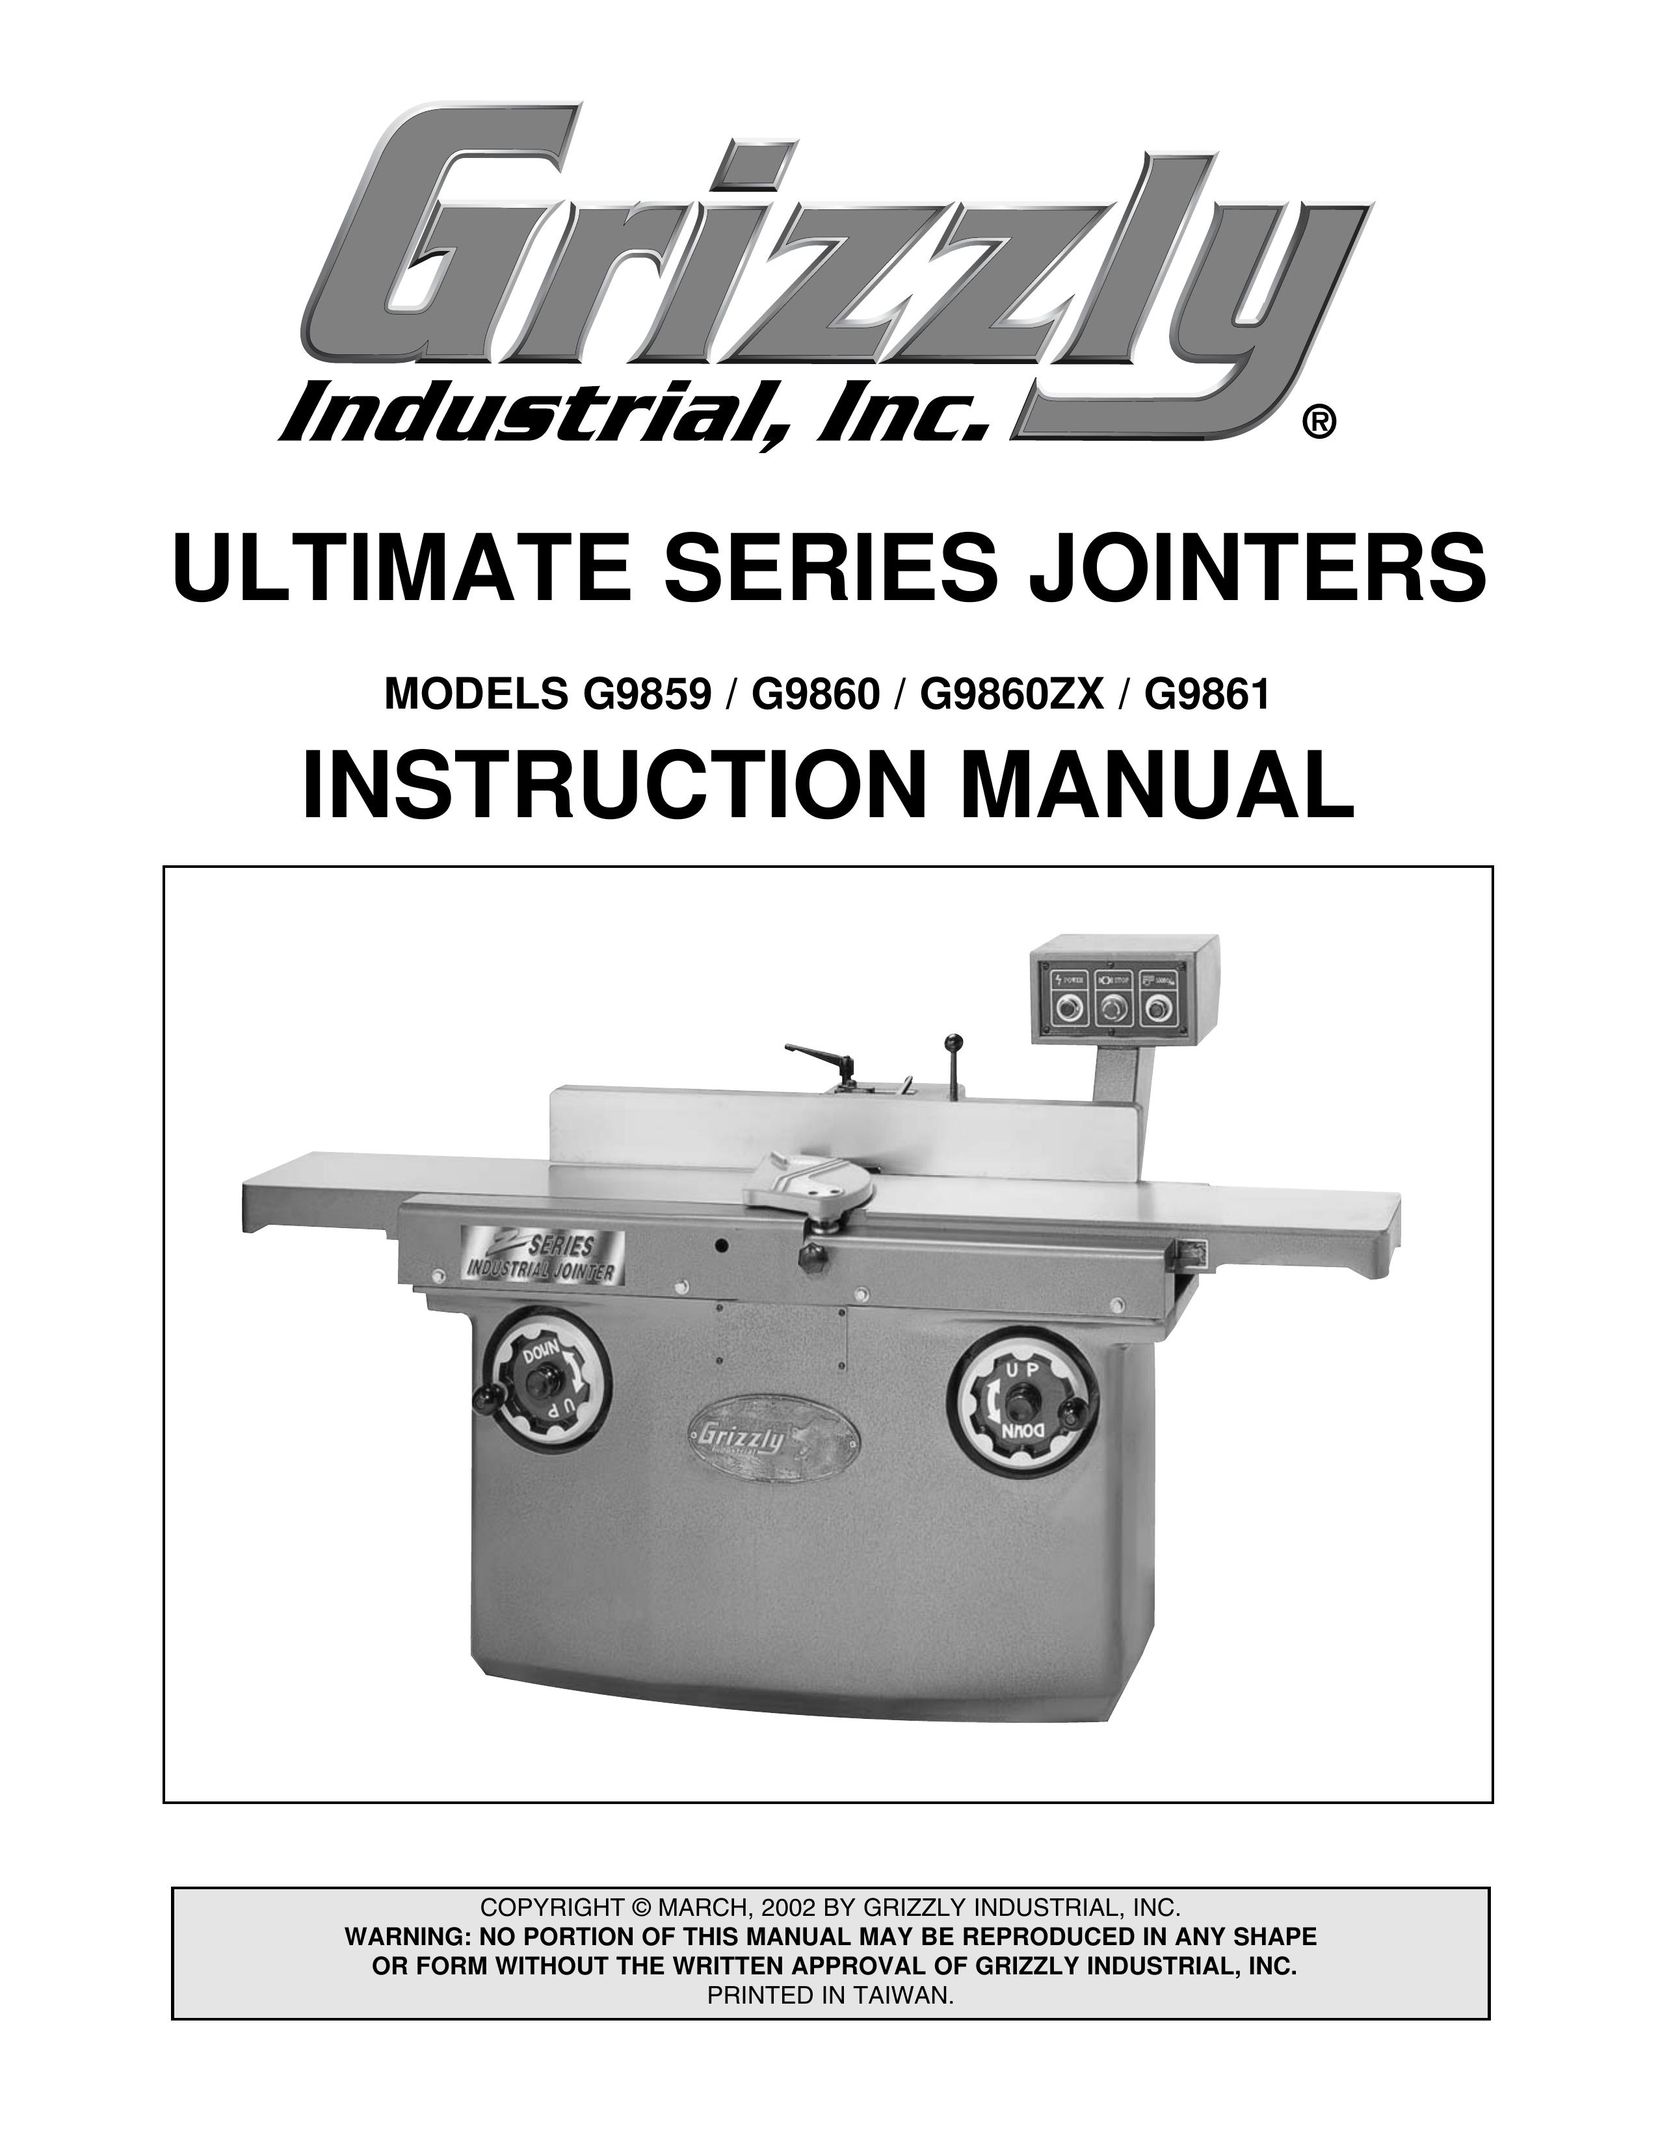 Grizzly G9861 Biscuit Joiner User Manual (Page 1)